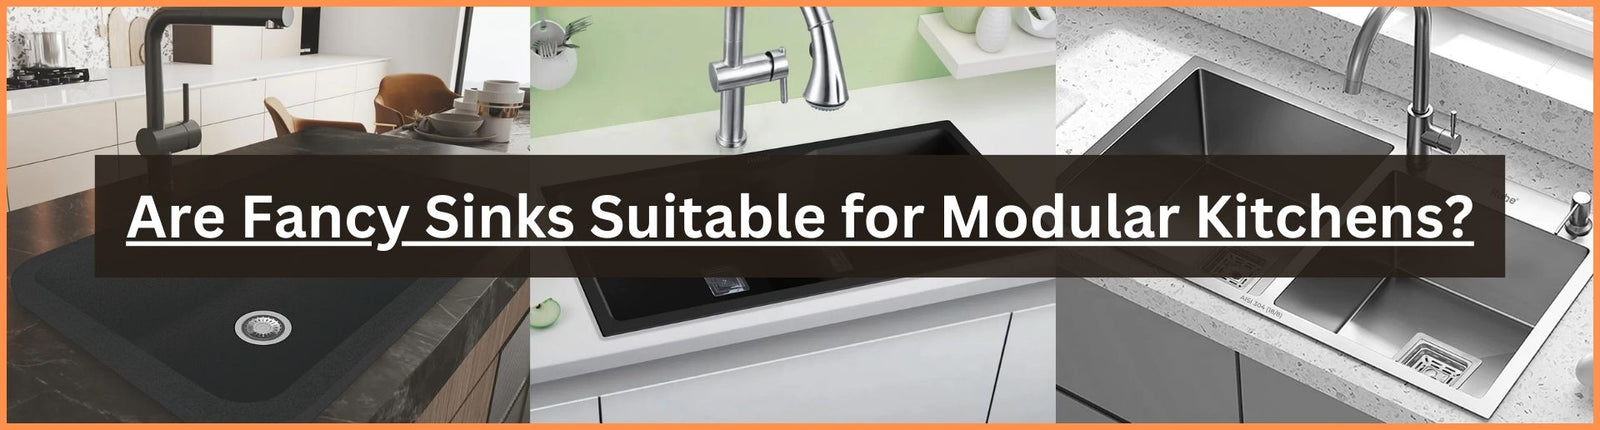 Are Fancy Sinks Suitable for Modular Kitchens